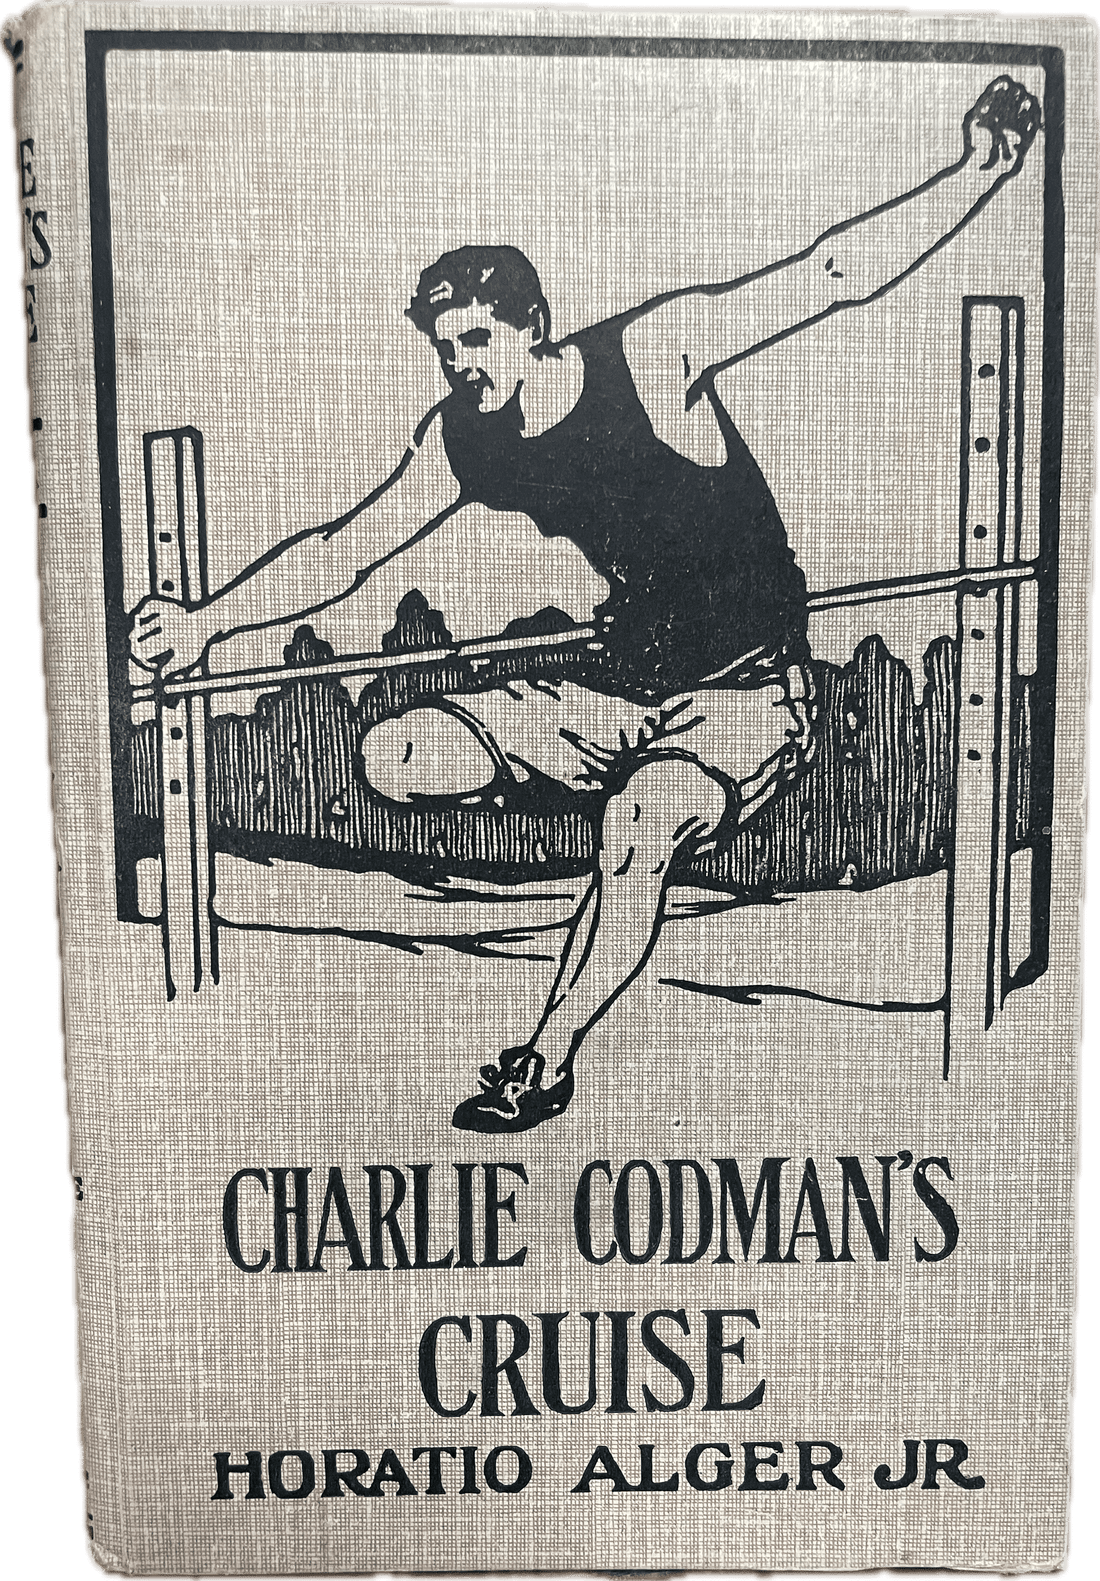 Sports themed Vintage Book - Charlie Codman's Cruise